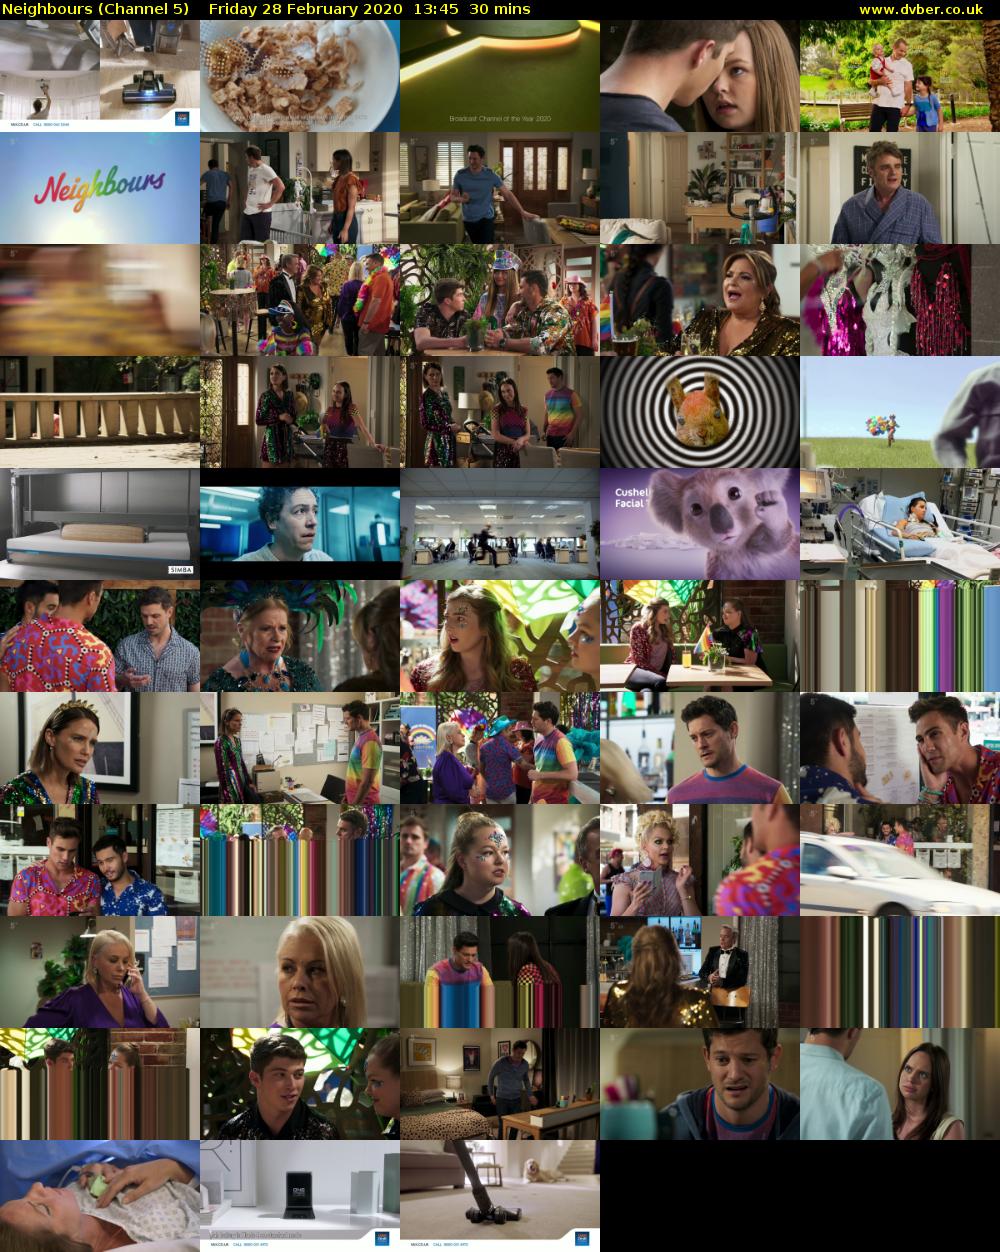 Neighbours (Channel 5) Friday 28 February 2020 13:45 - 14:15